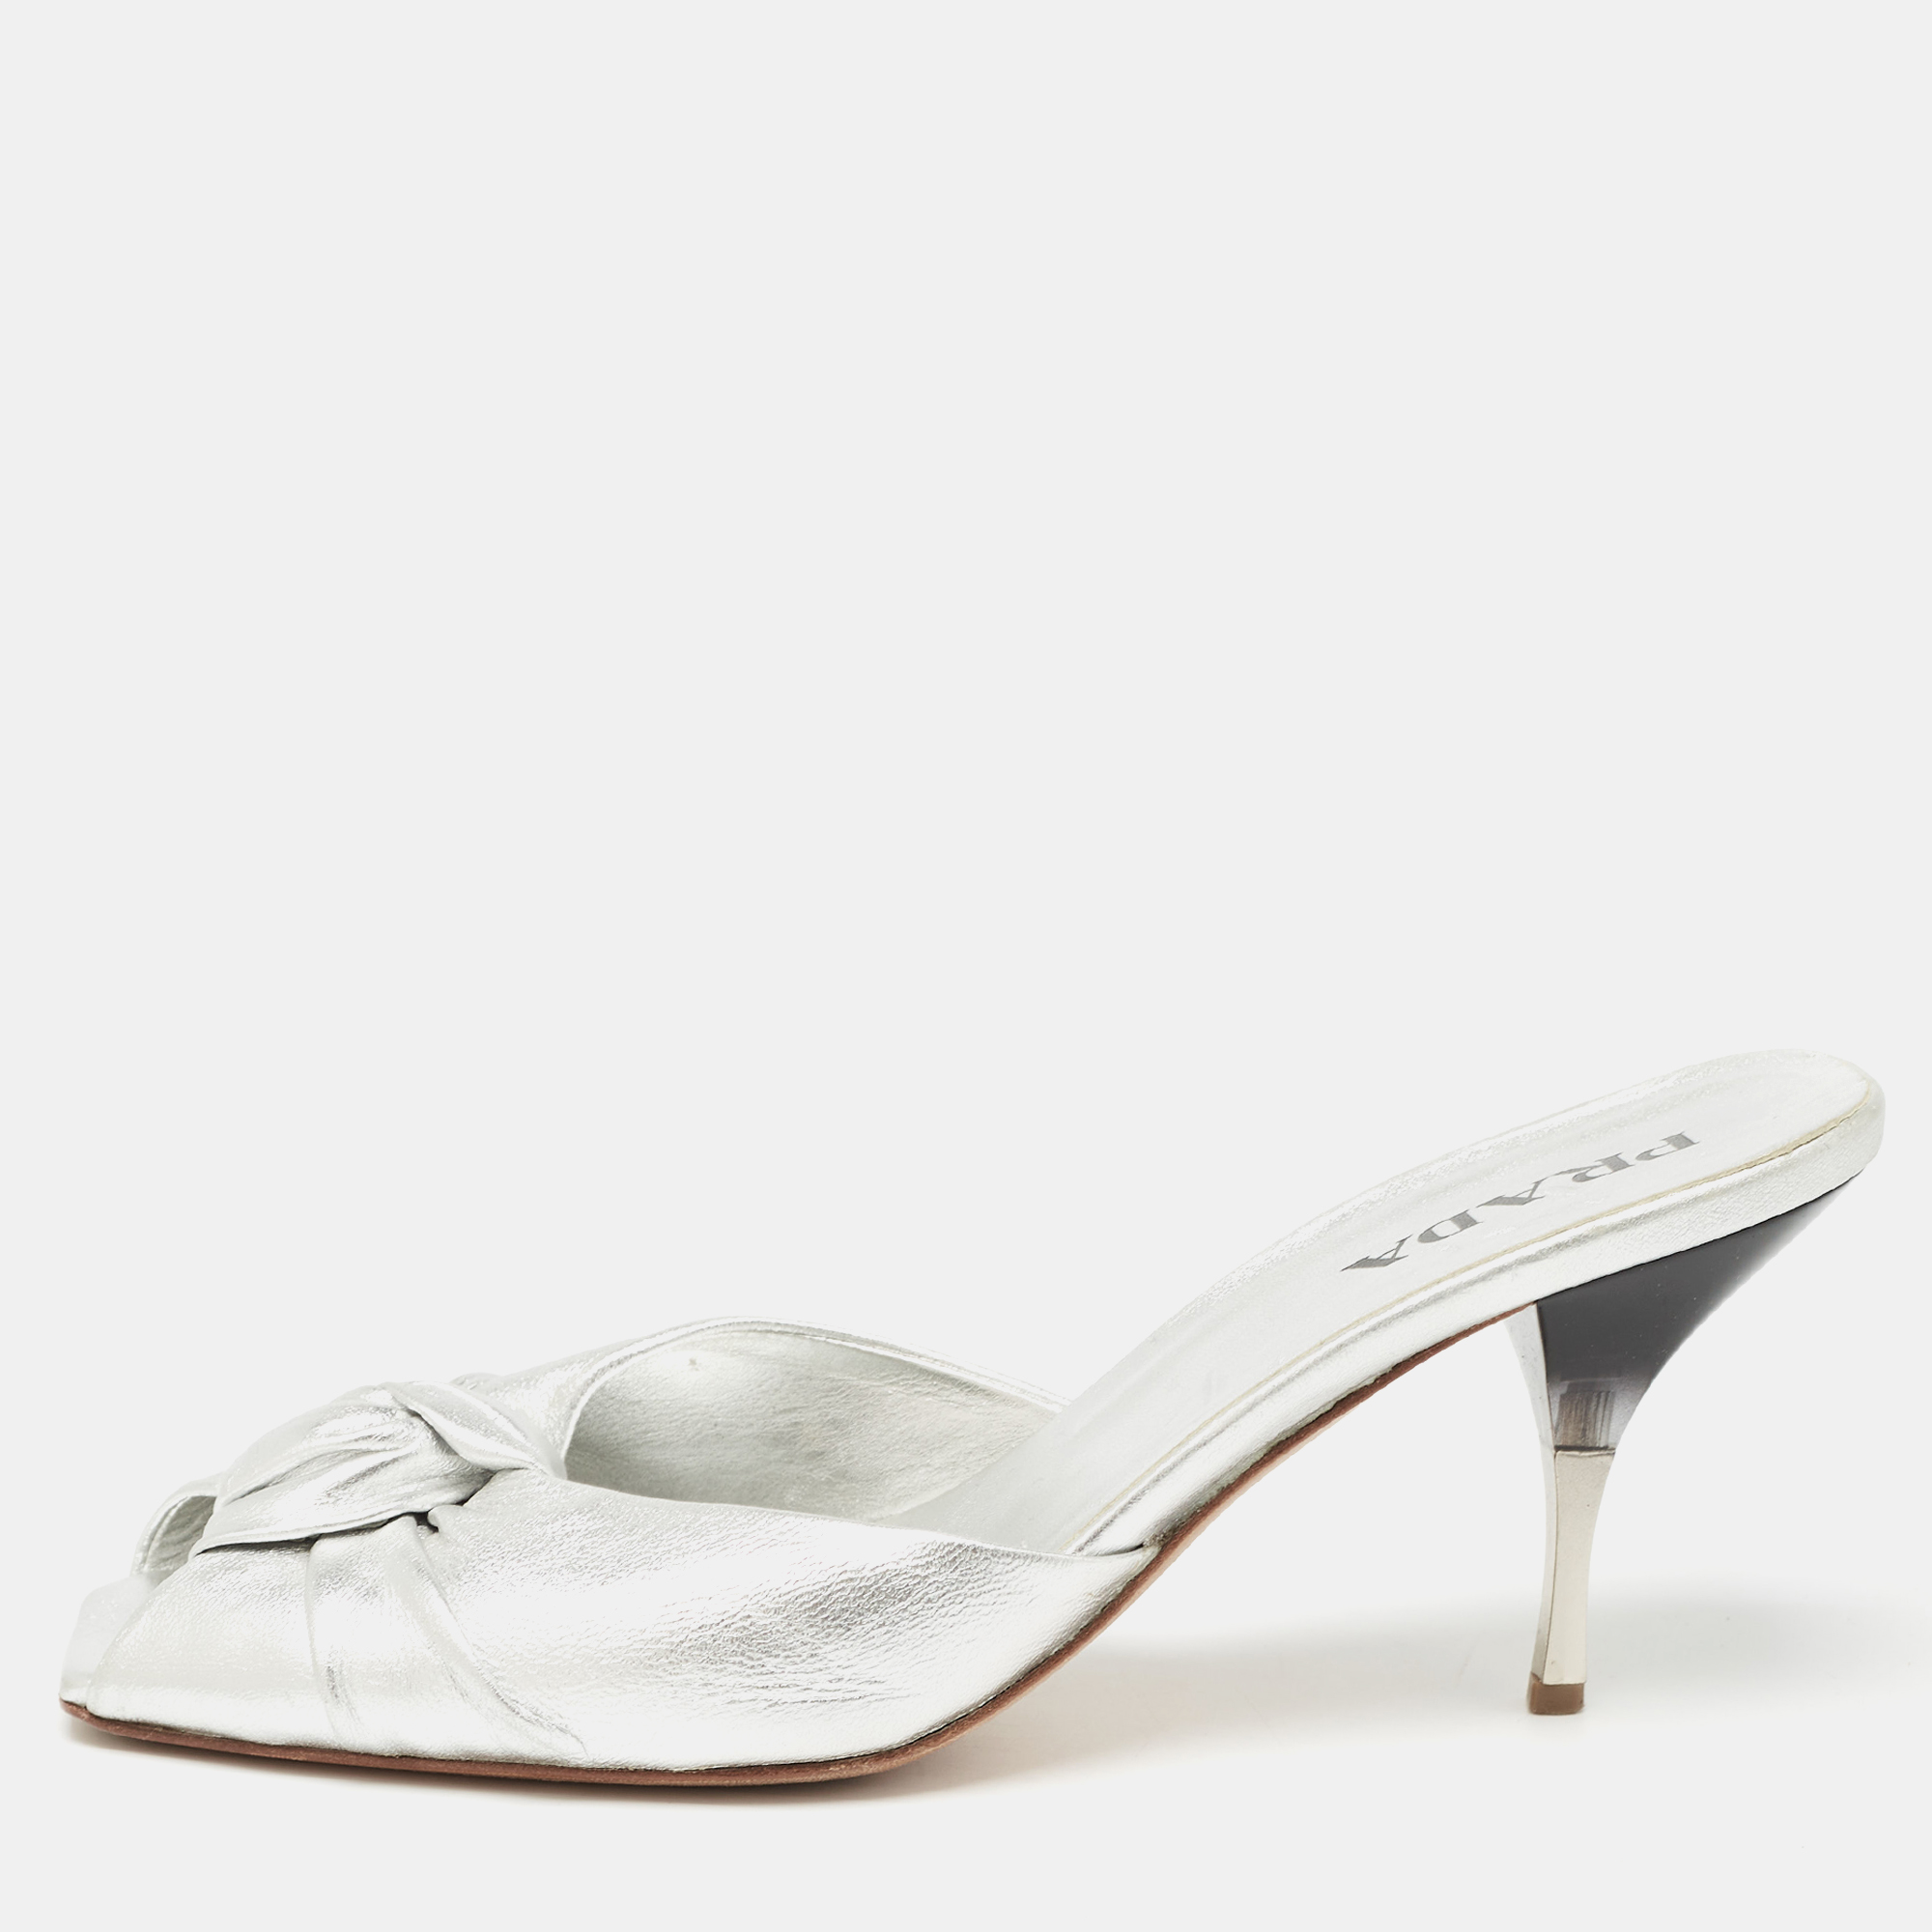 Prada silver foil leather knotted square peep toe slide sandals size 36